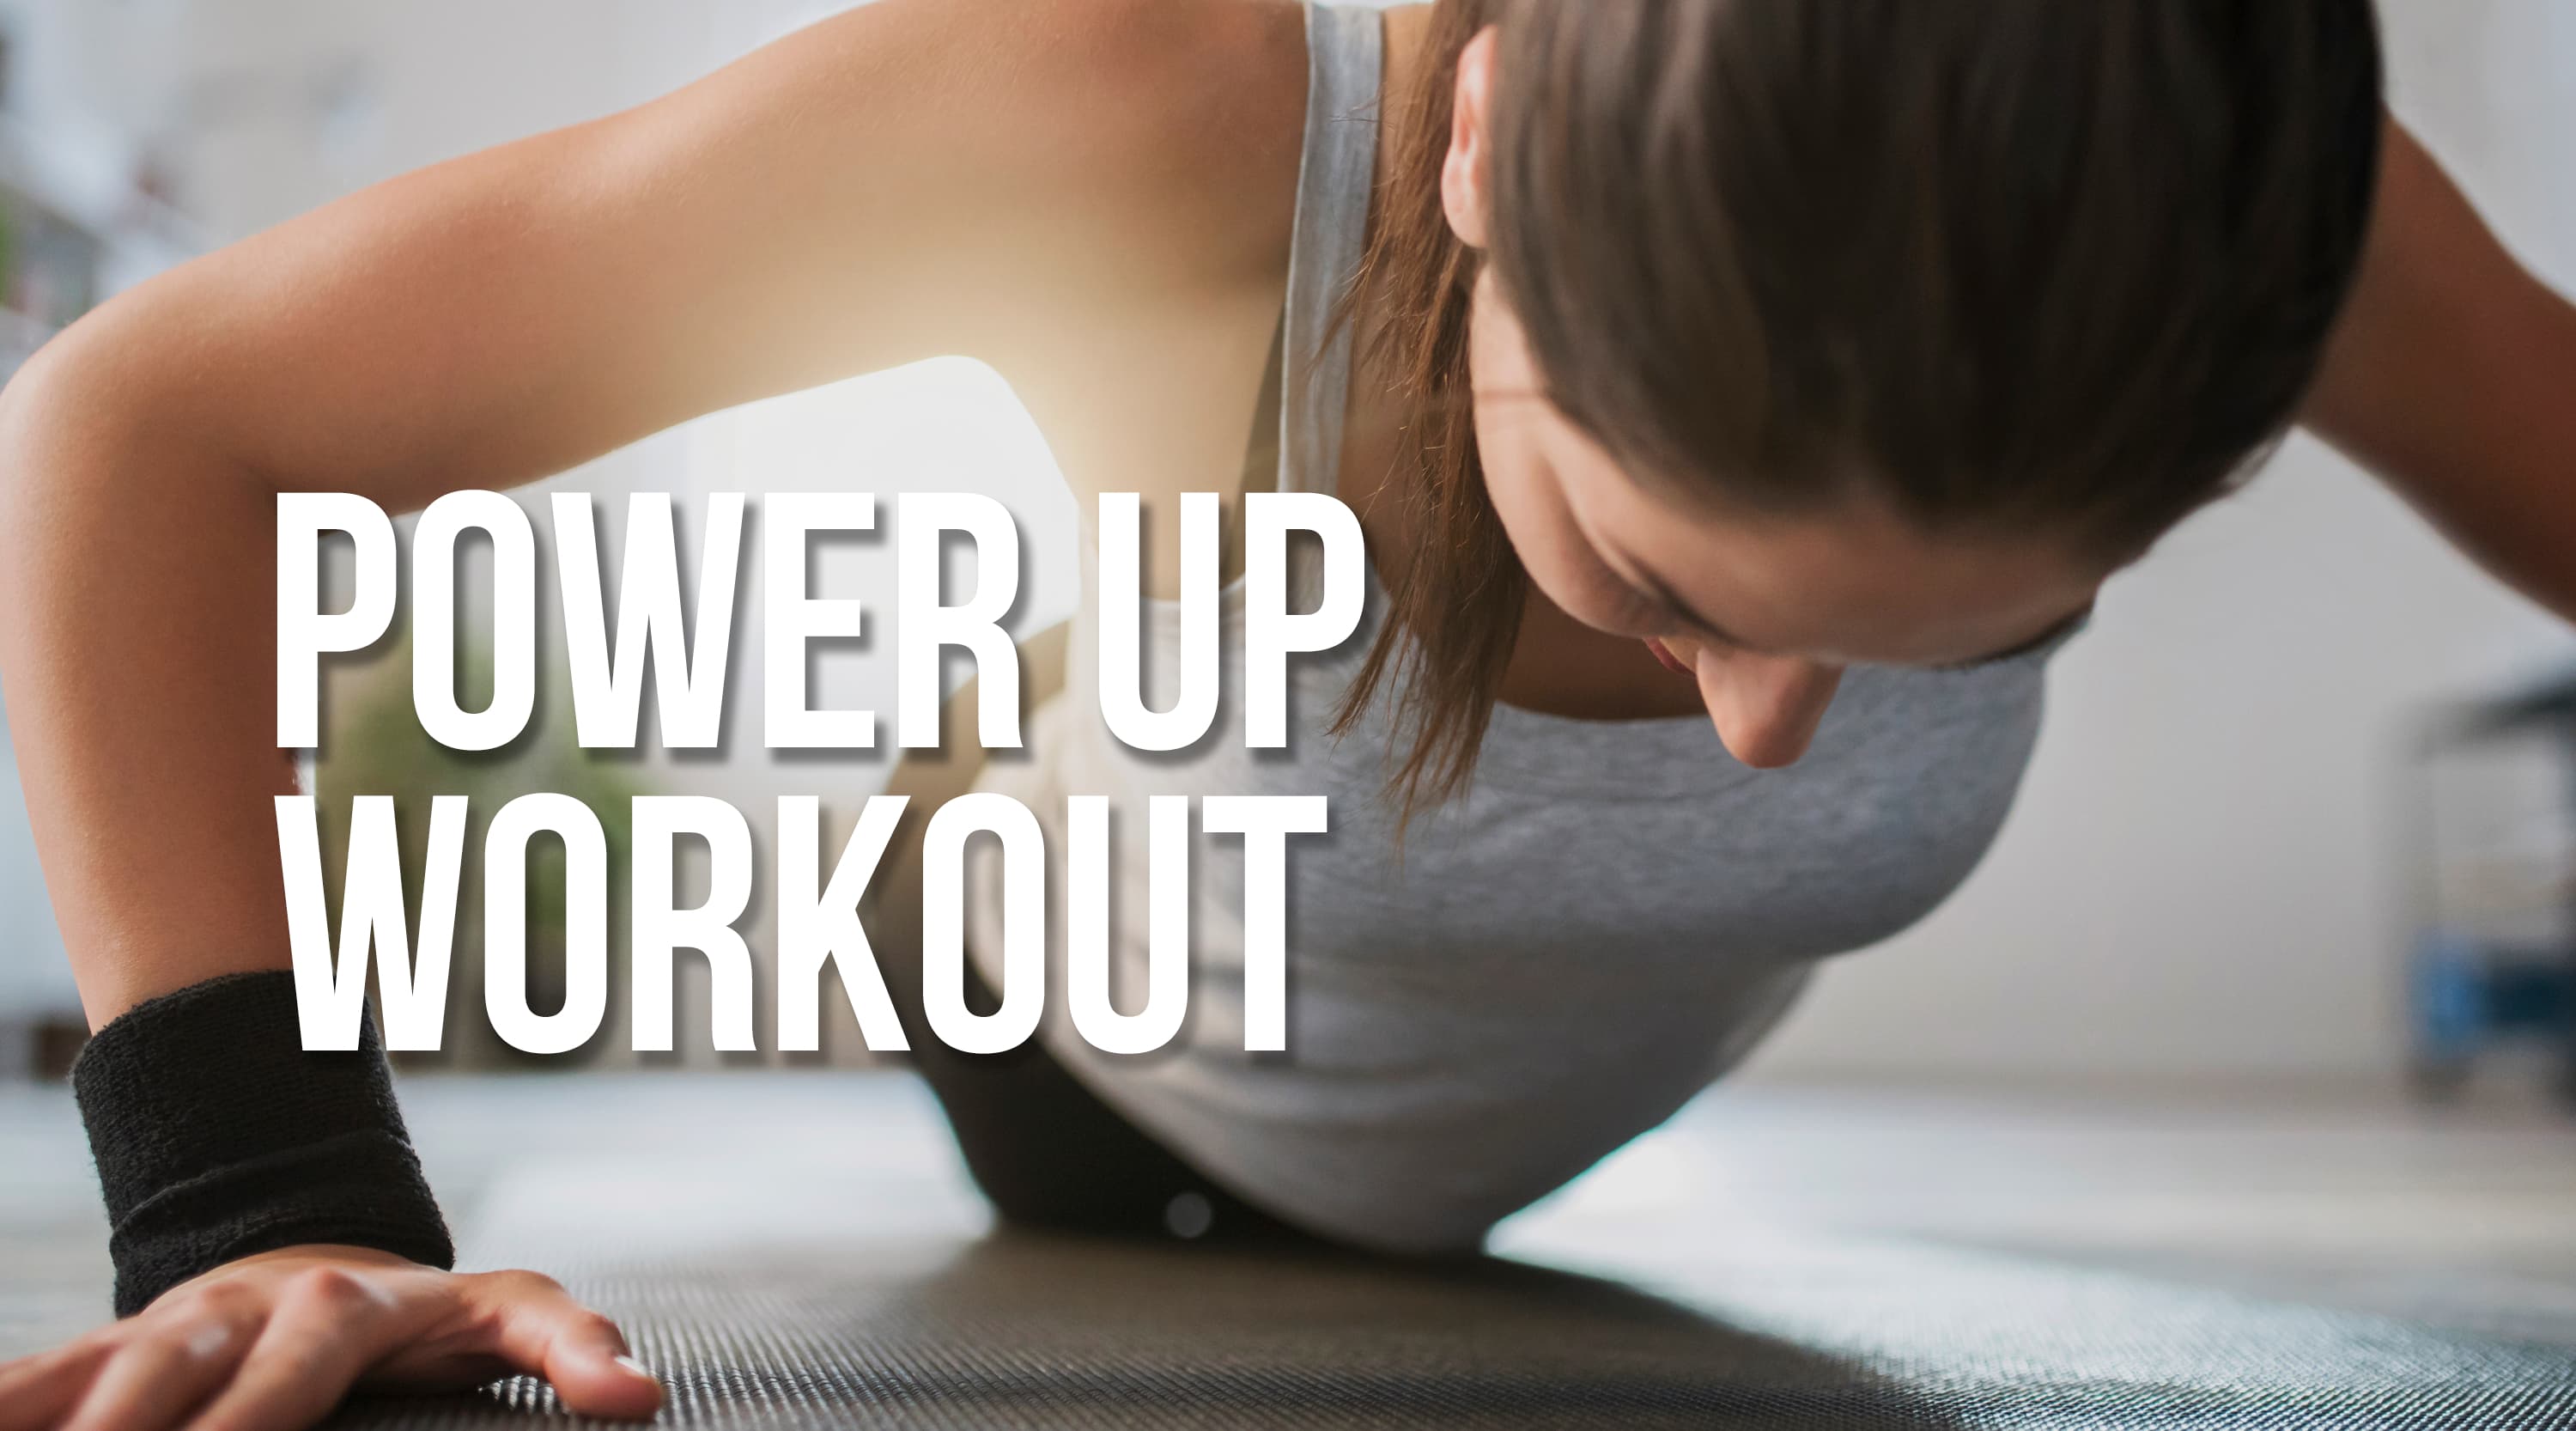 Power Up Workout